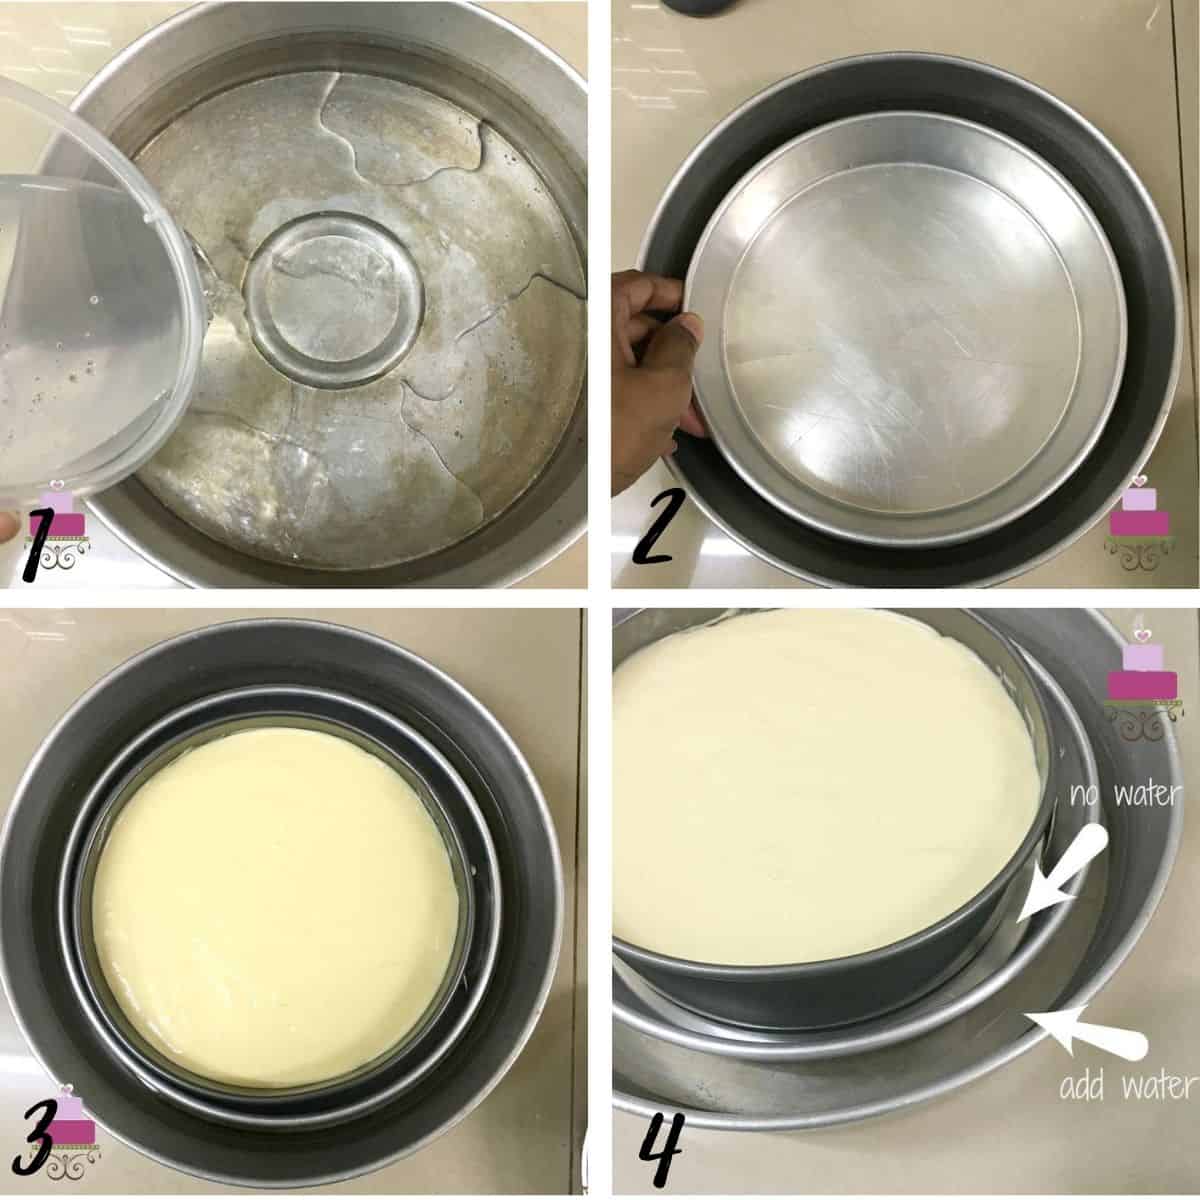 A poster of 4 images showing how to do a water bath for baking.